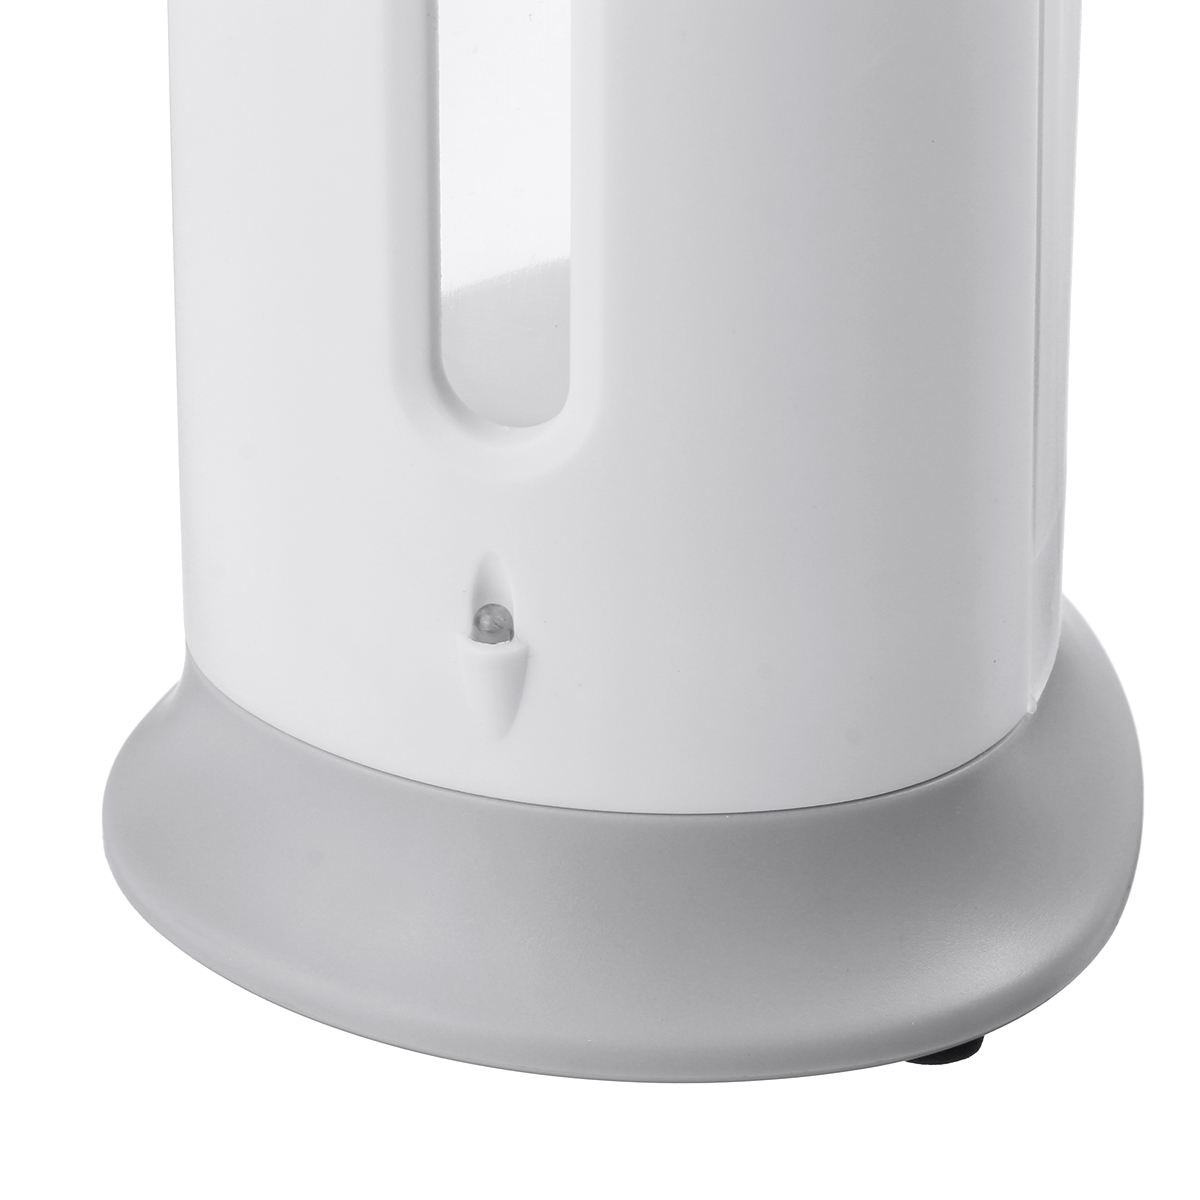 Soap-Dispenser-Automatic-Lotion-Dispenser-Infrared-Sensor-Automatic-No-Touch-1690580-9